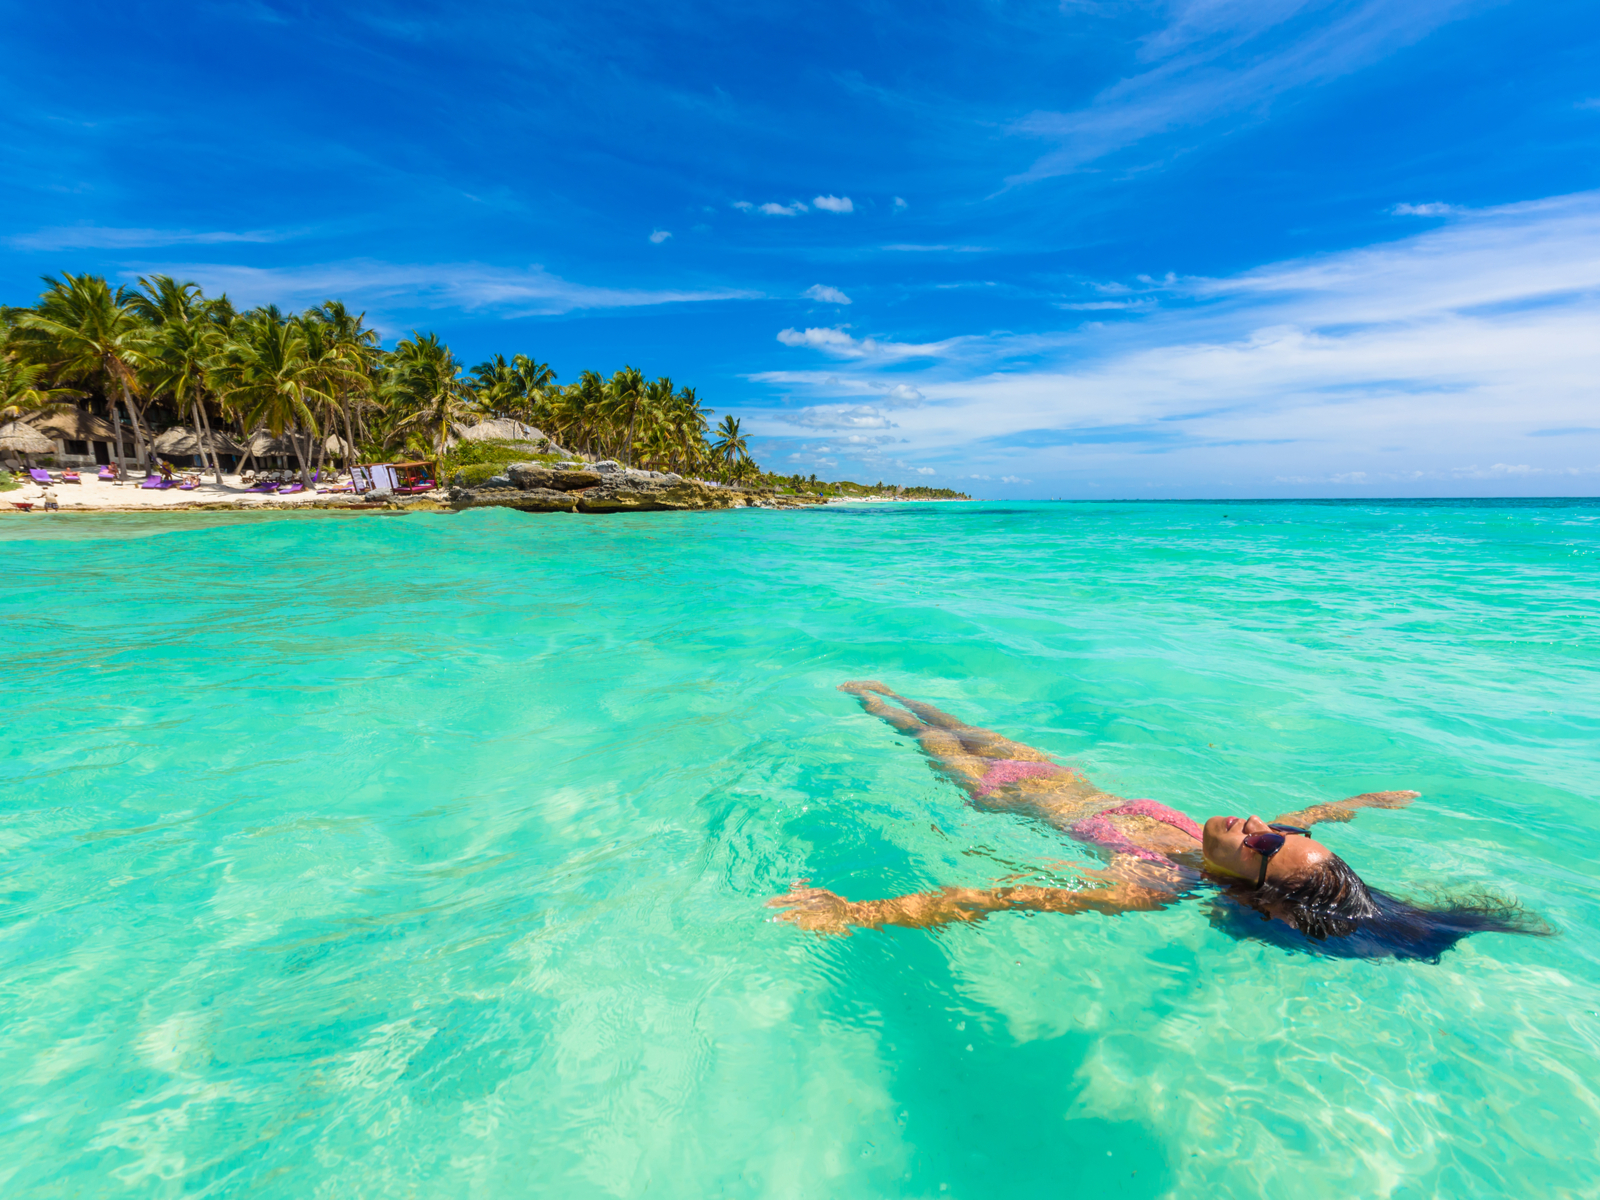 As an image for a piece titled Is Mexico Safe, a woman floating on her back in the water in Tulum